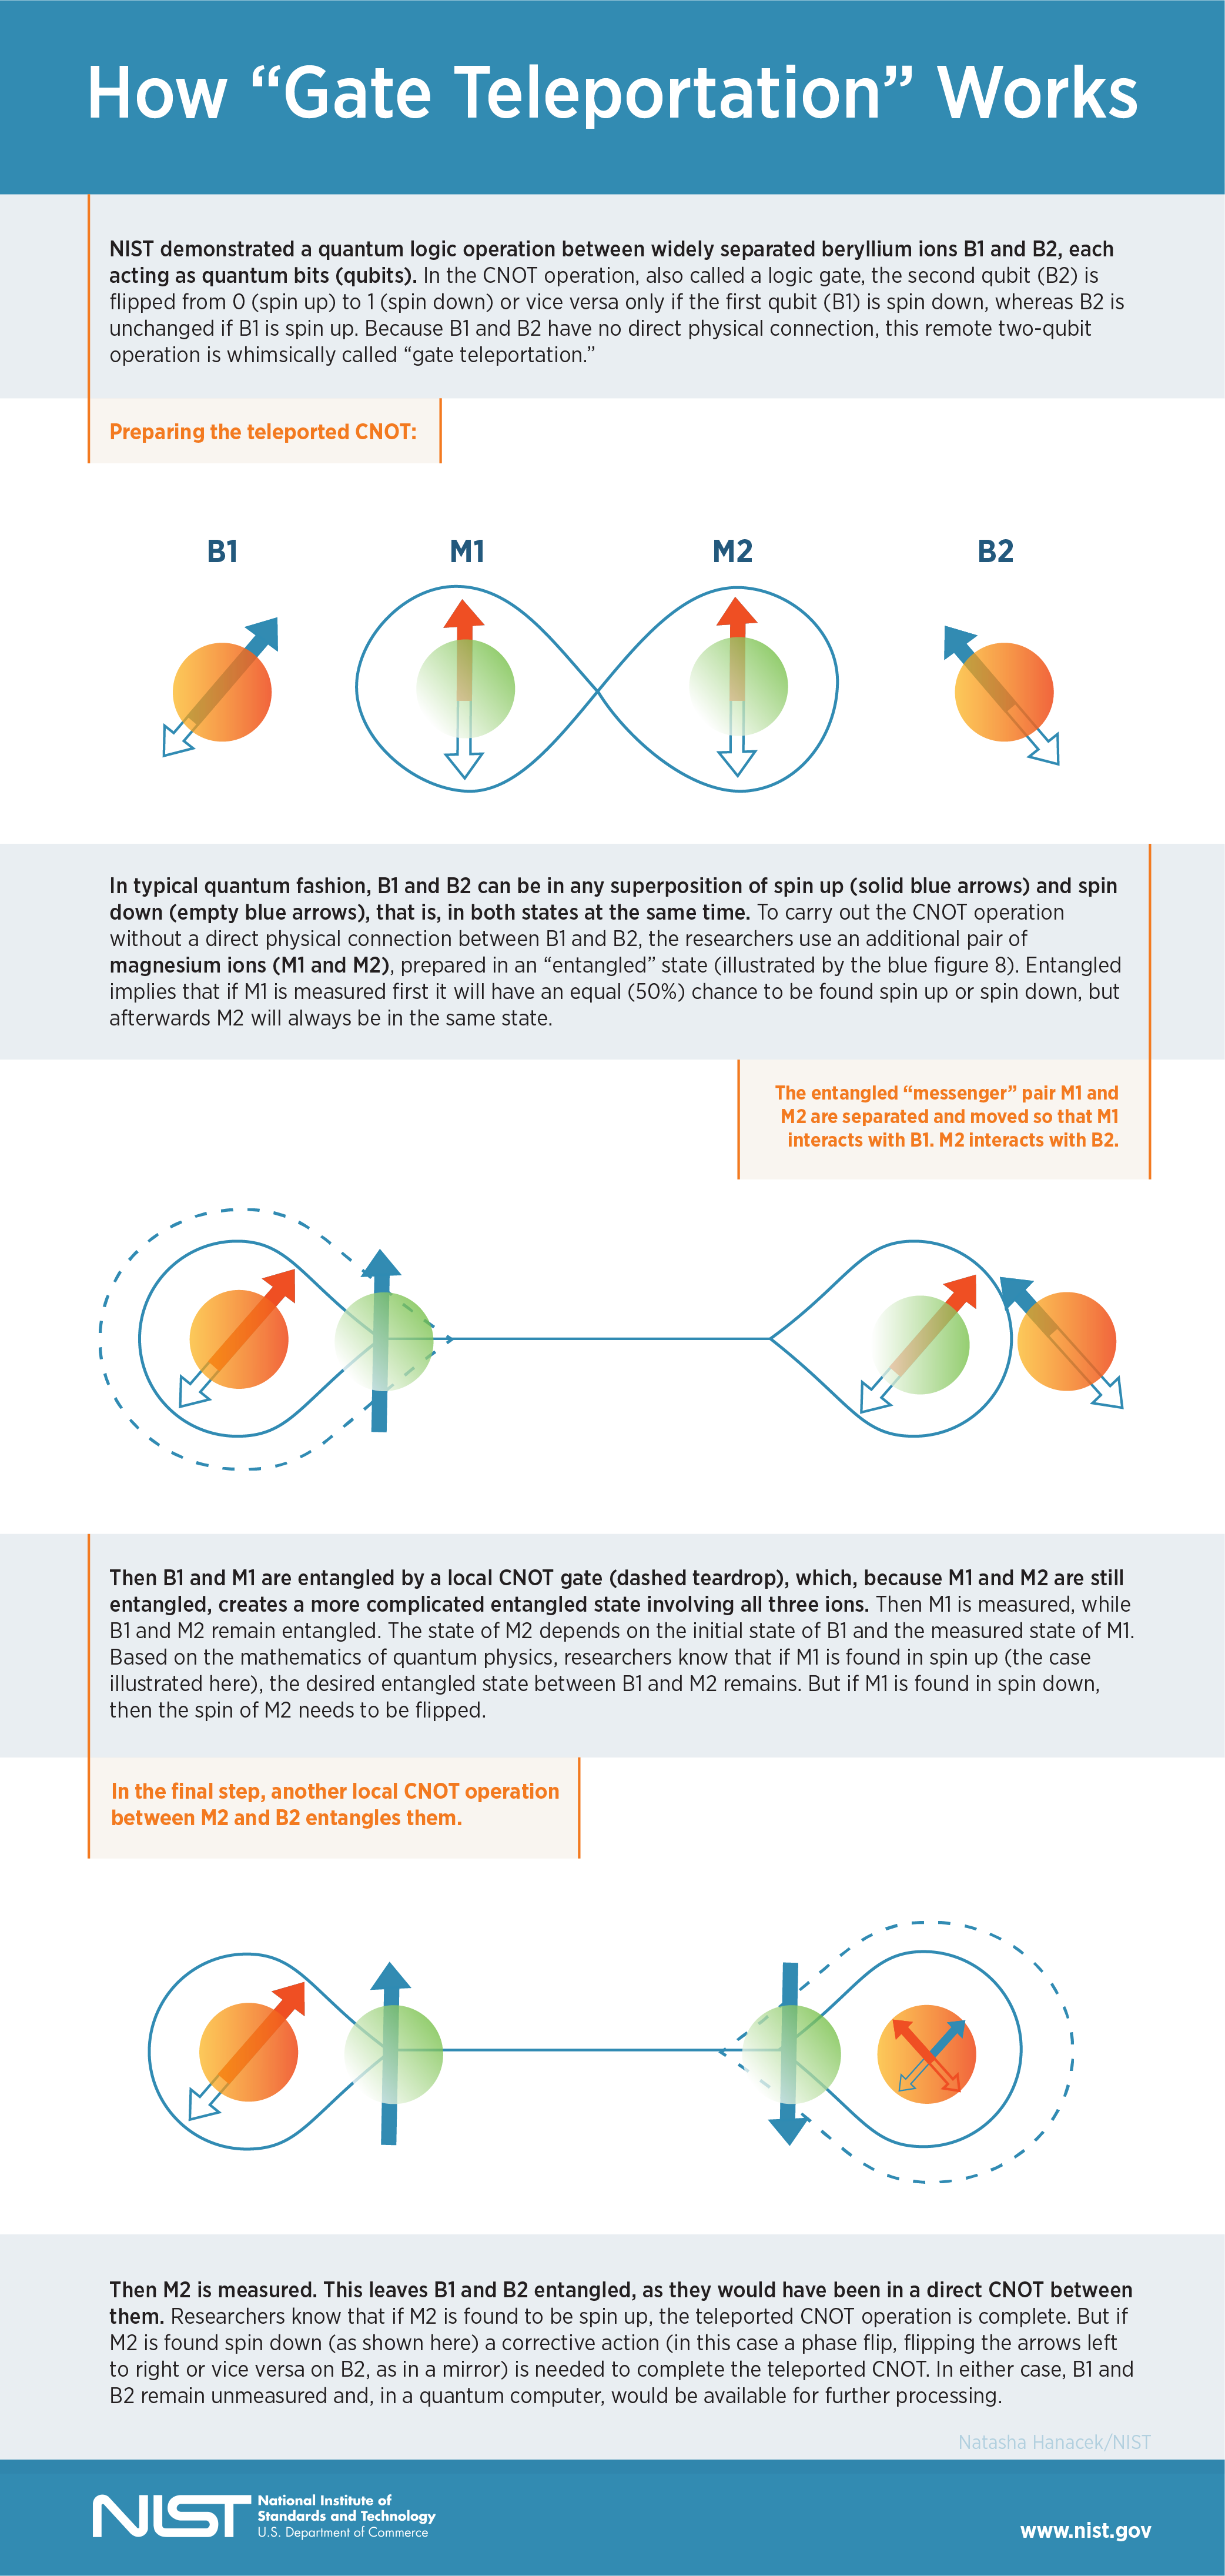 Infographic shows the CNOT operation, a remote two-qubit operation also called a logic gate or "gate teleportation."